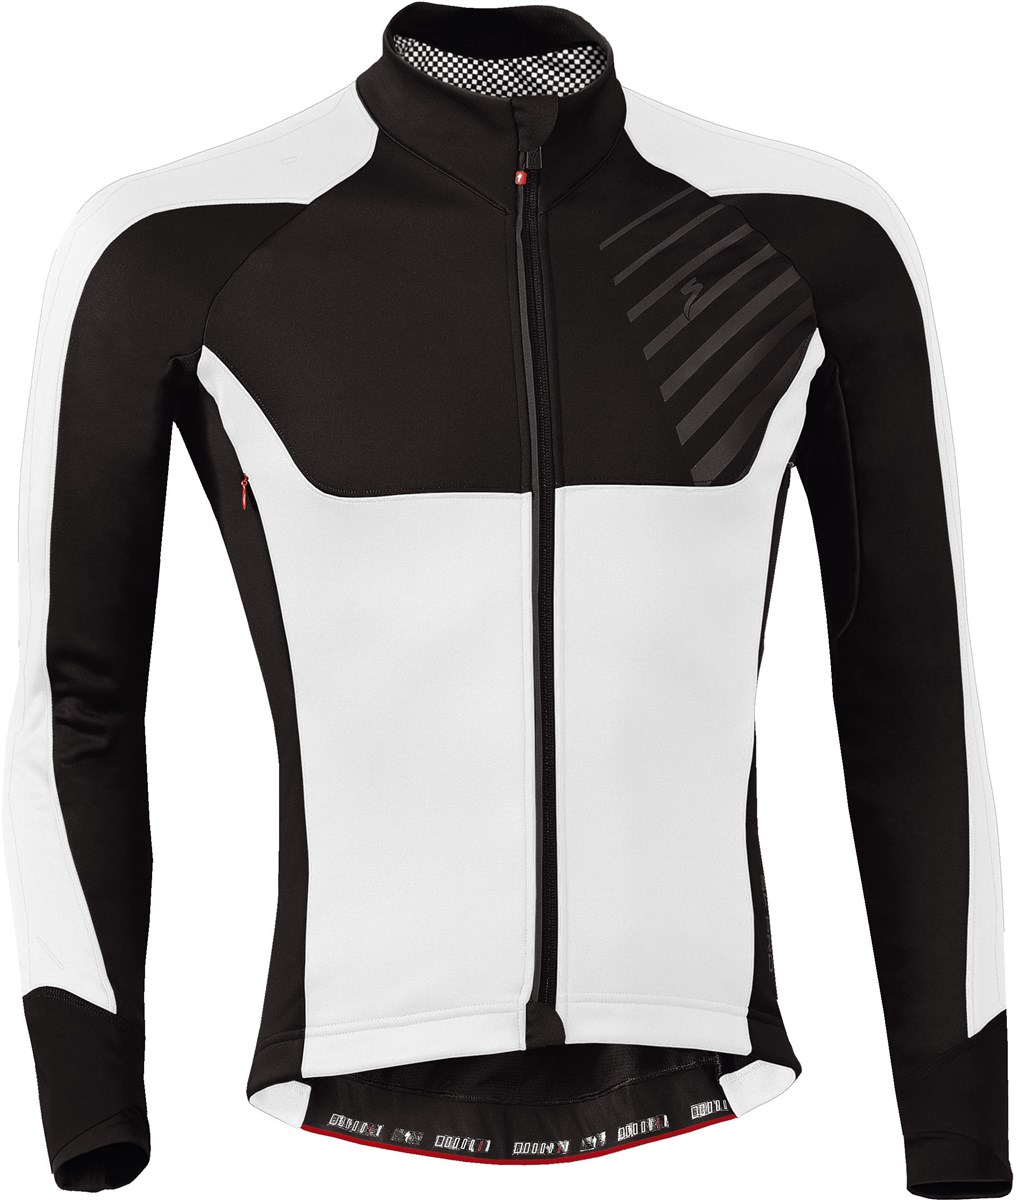 Specialized SL Pro Winter Part. Gore WS Windproof Cycling Jacket product image